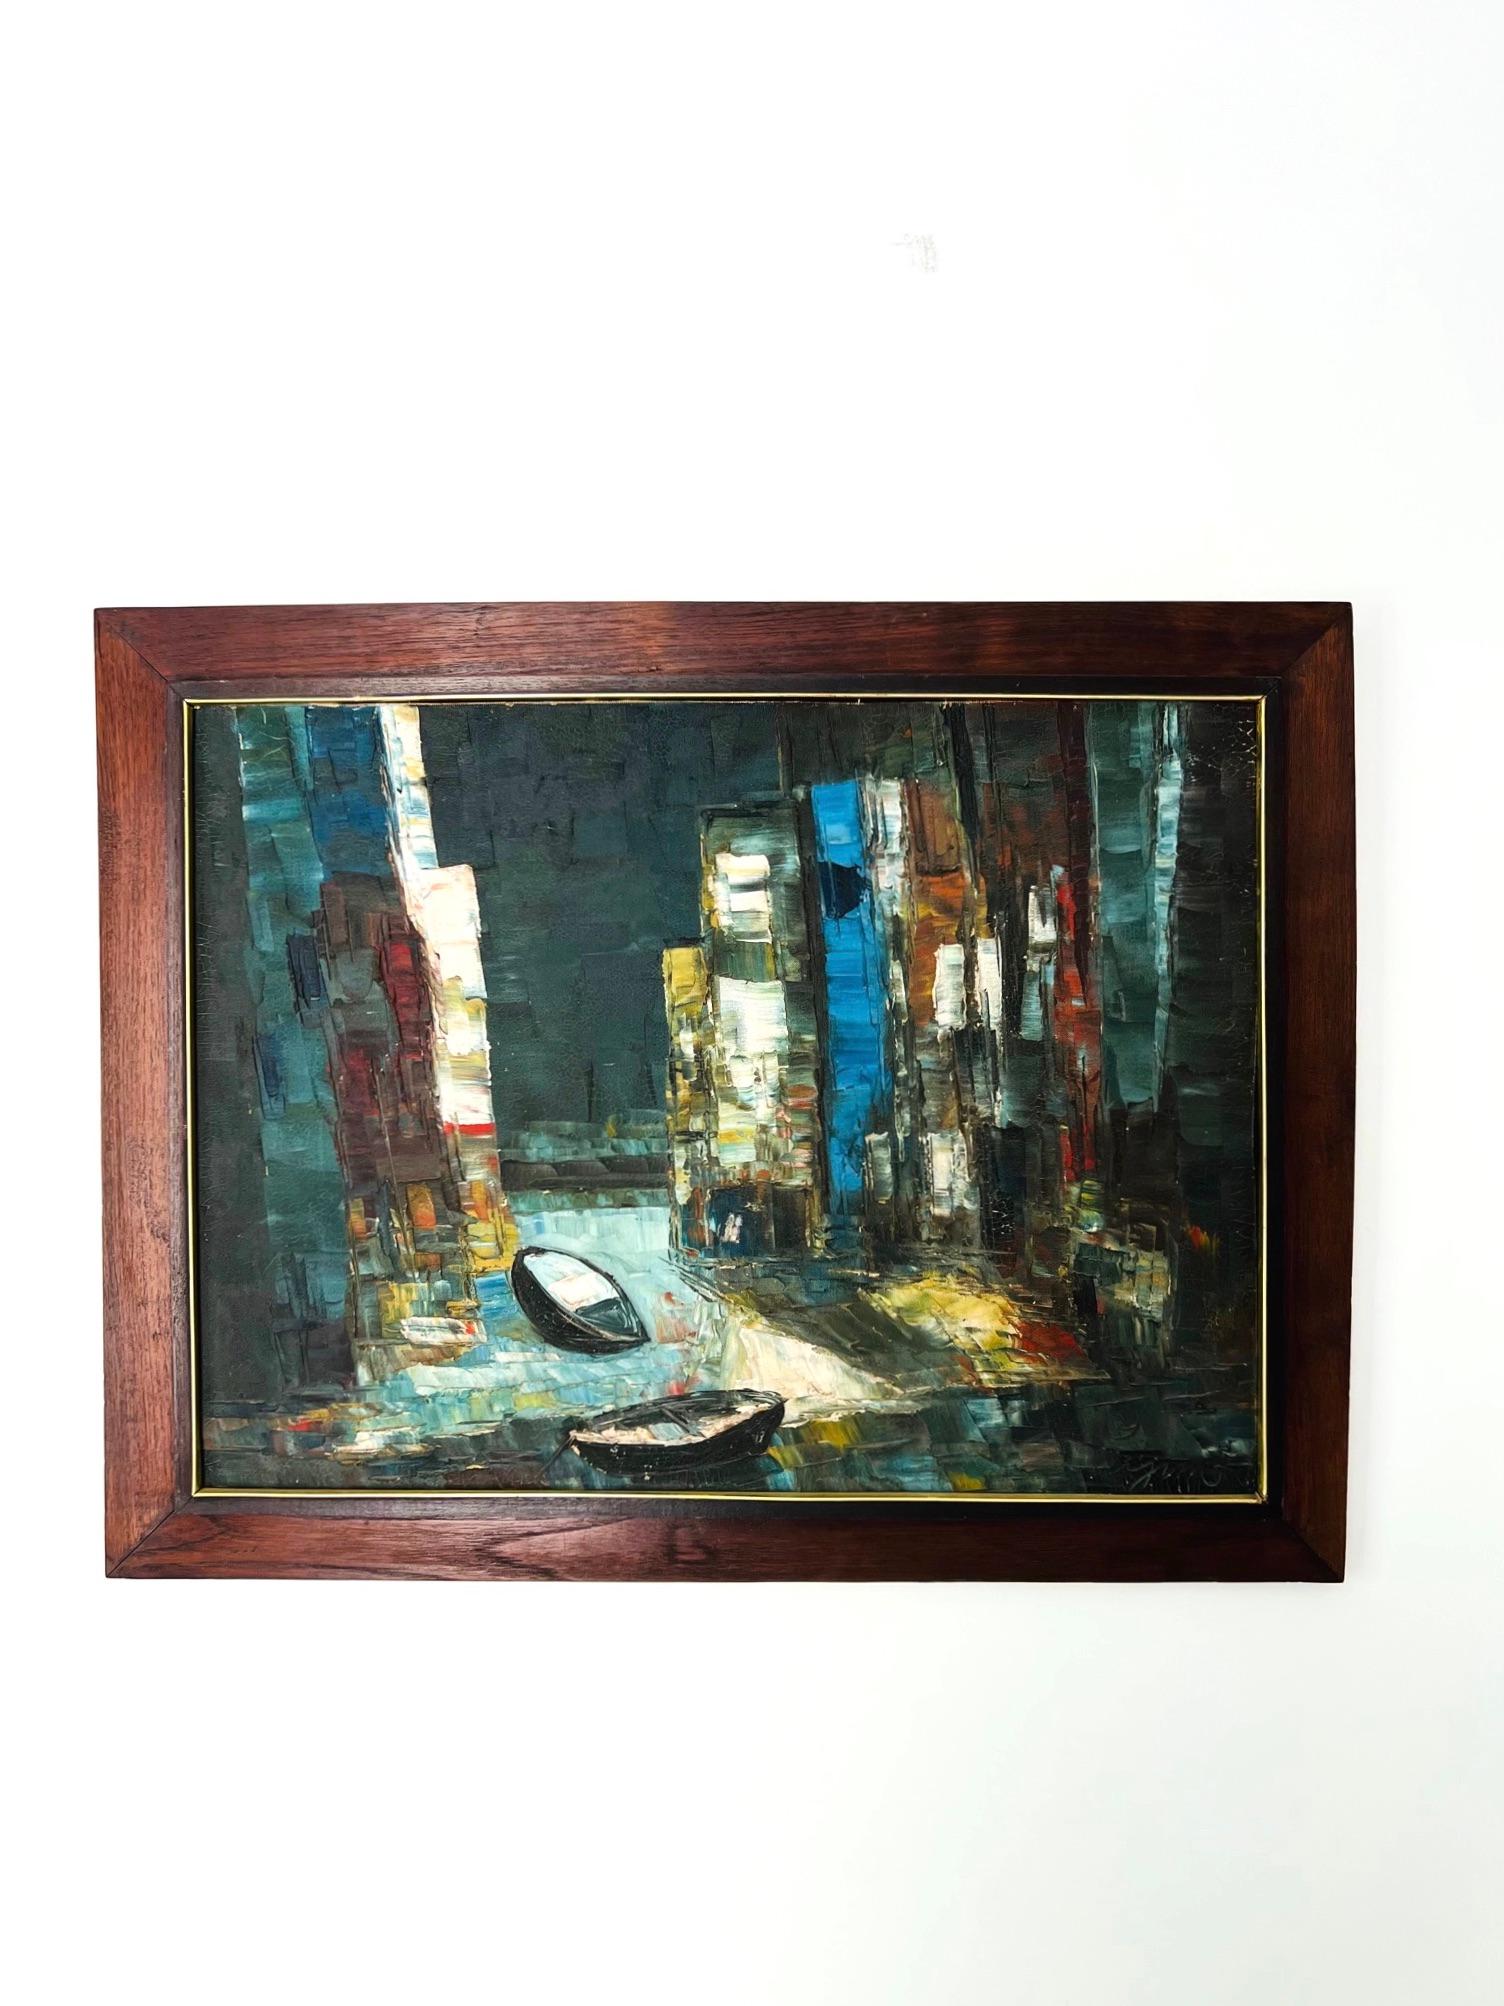 Abstract Painting in Original Wood Frame, Rowboats Oil on Board, c. 1950s For Sale 4